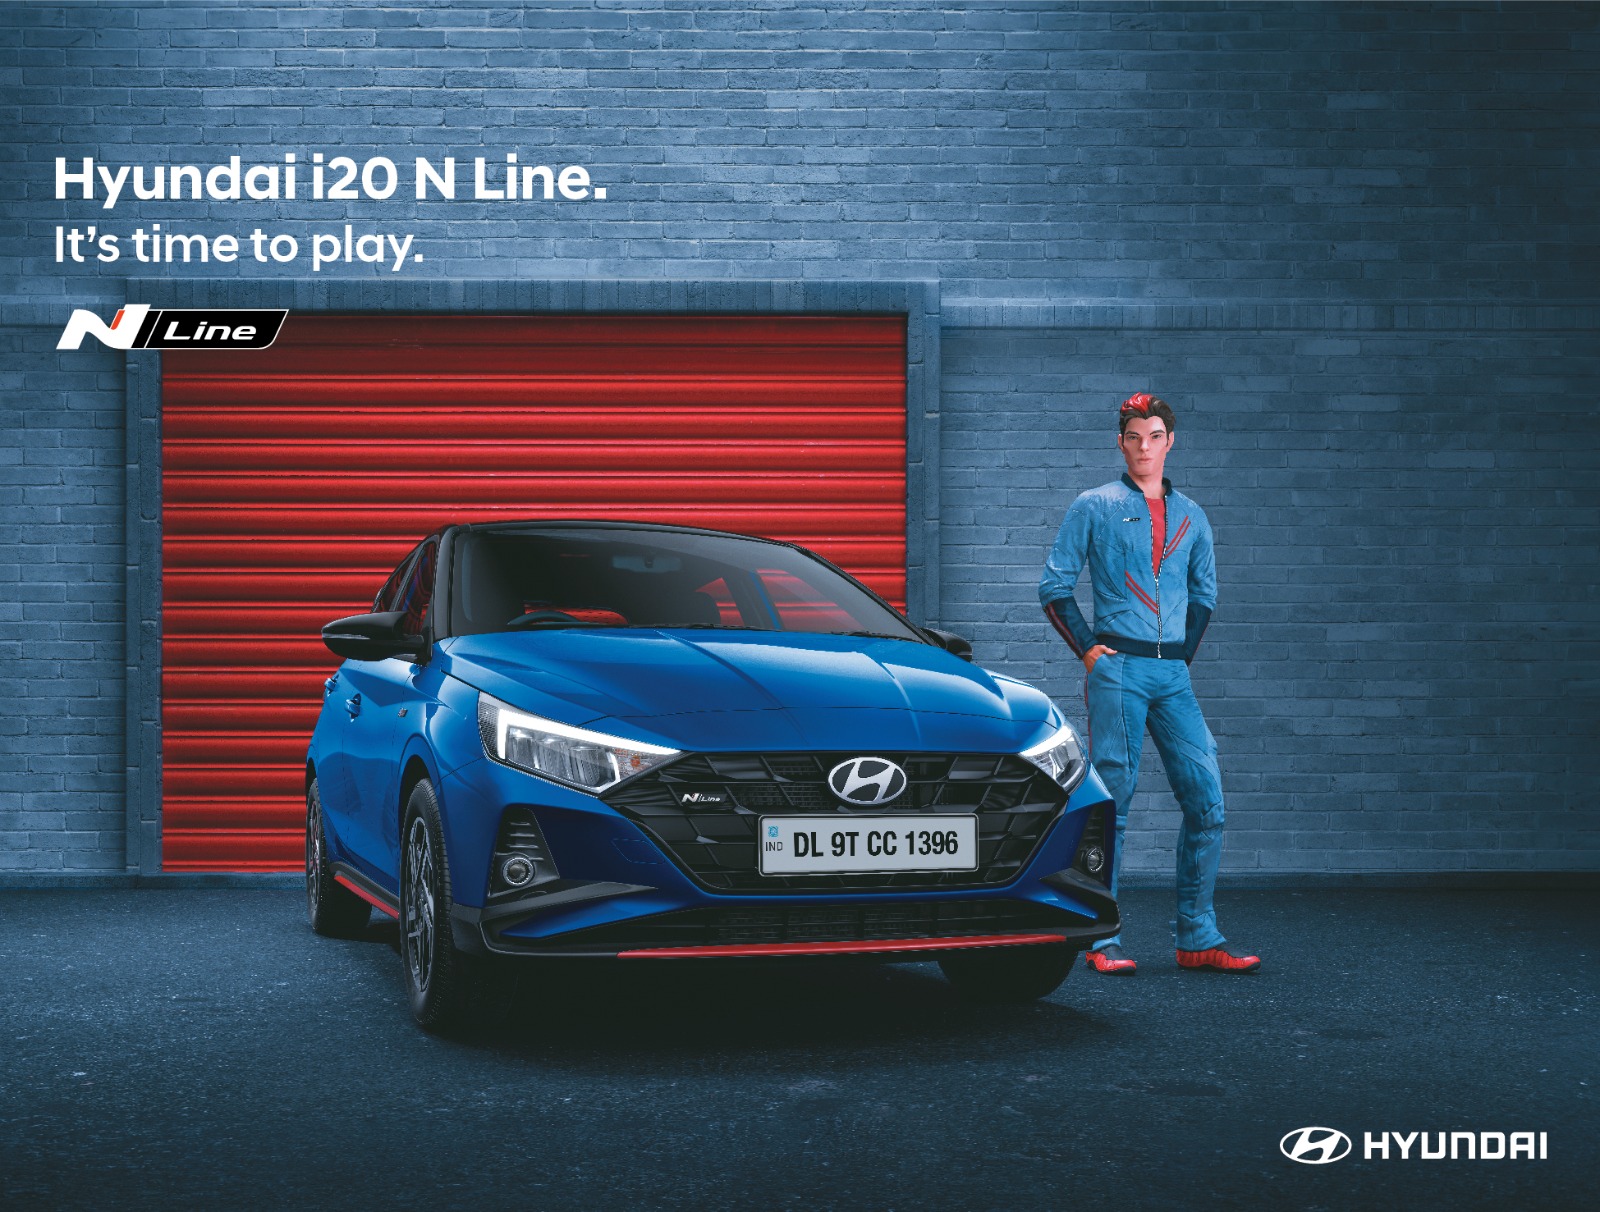 Hyundai Sold More Than 22,000 N Line Models In India